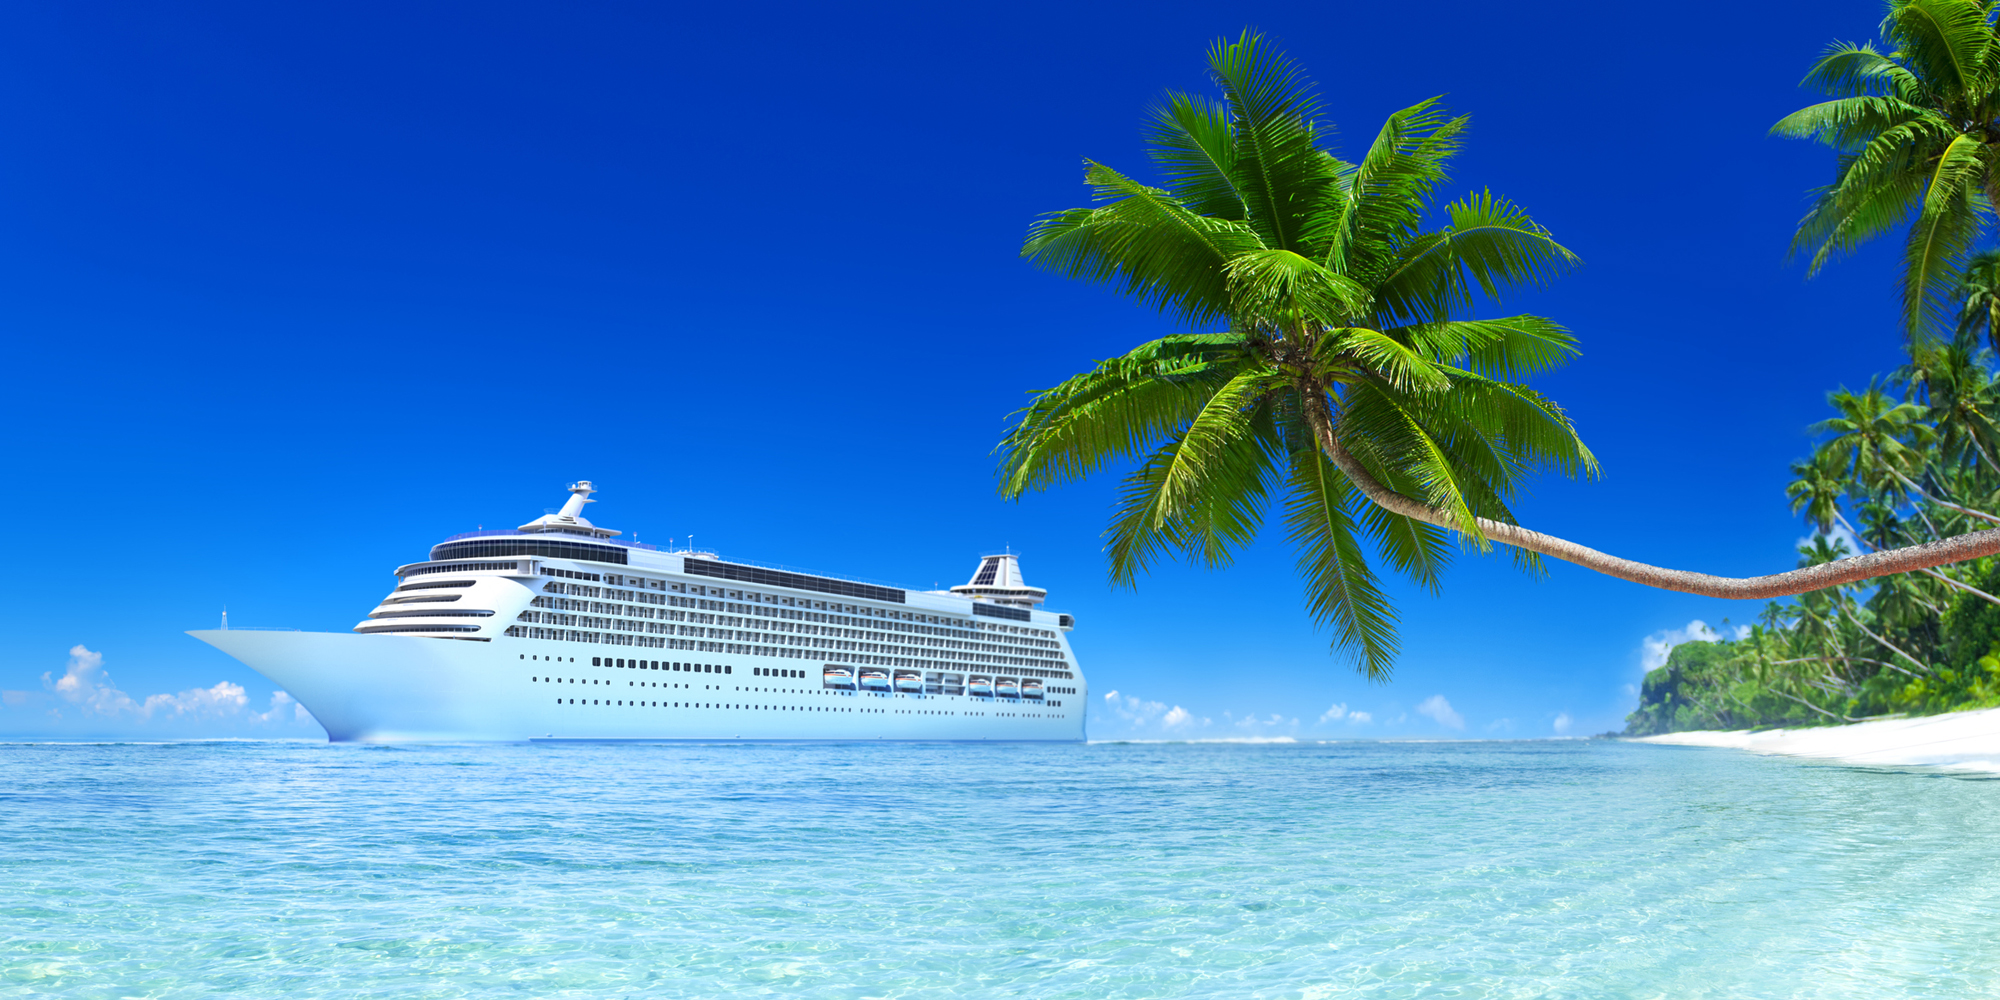 Cruise Vacation - Our designed 3D rendered Cruise ship with blue Sky, Turquoise sea and white sand, green palm trees.